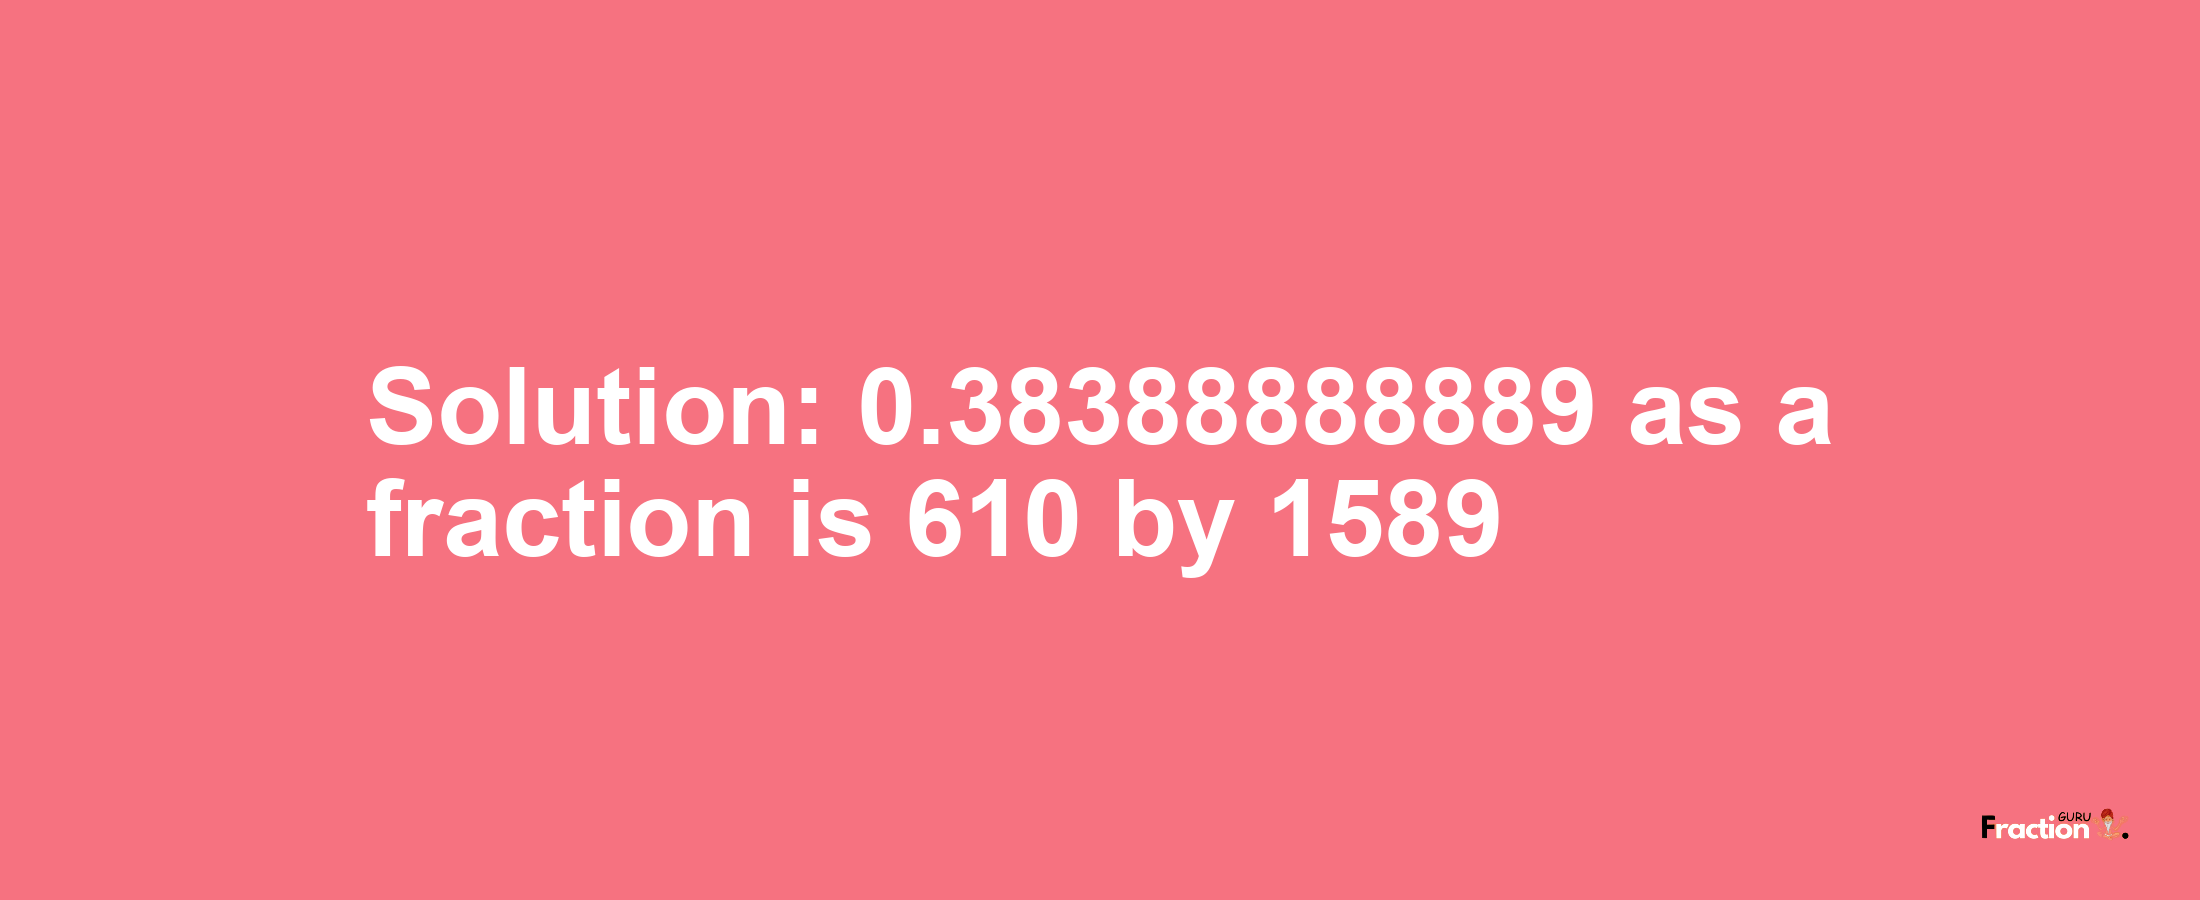 Solution:0.38388888889 as a fraction is 610/1589